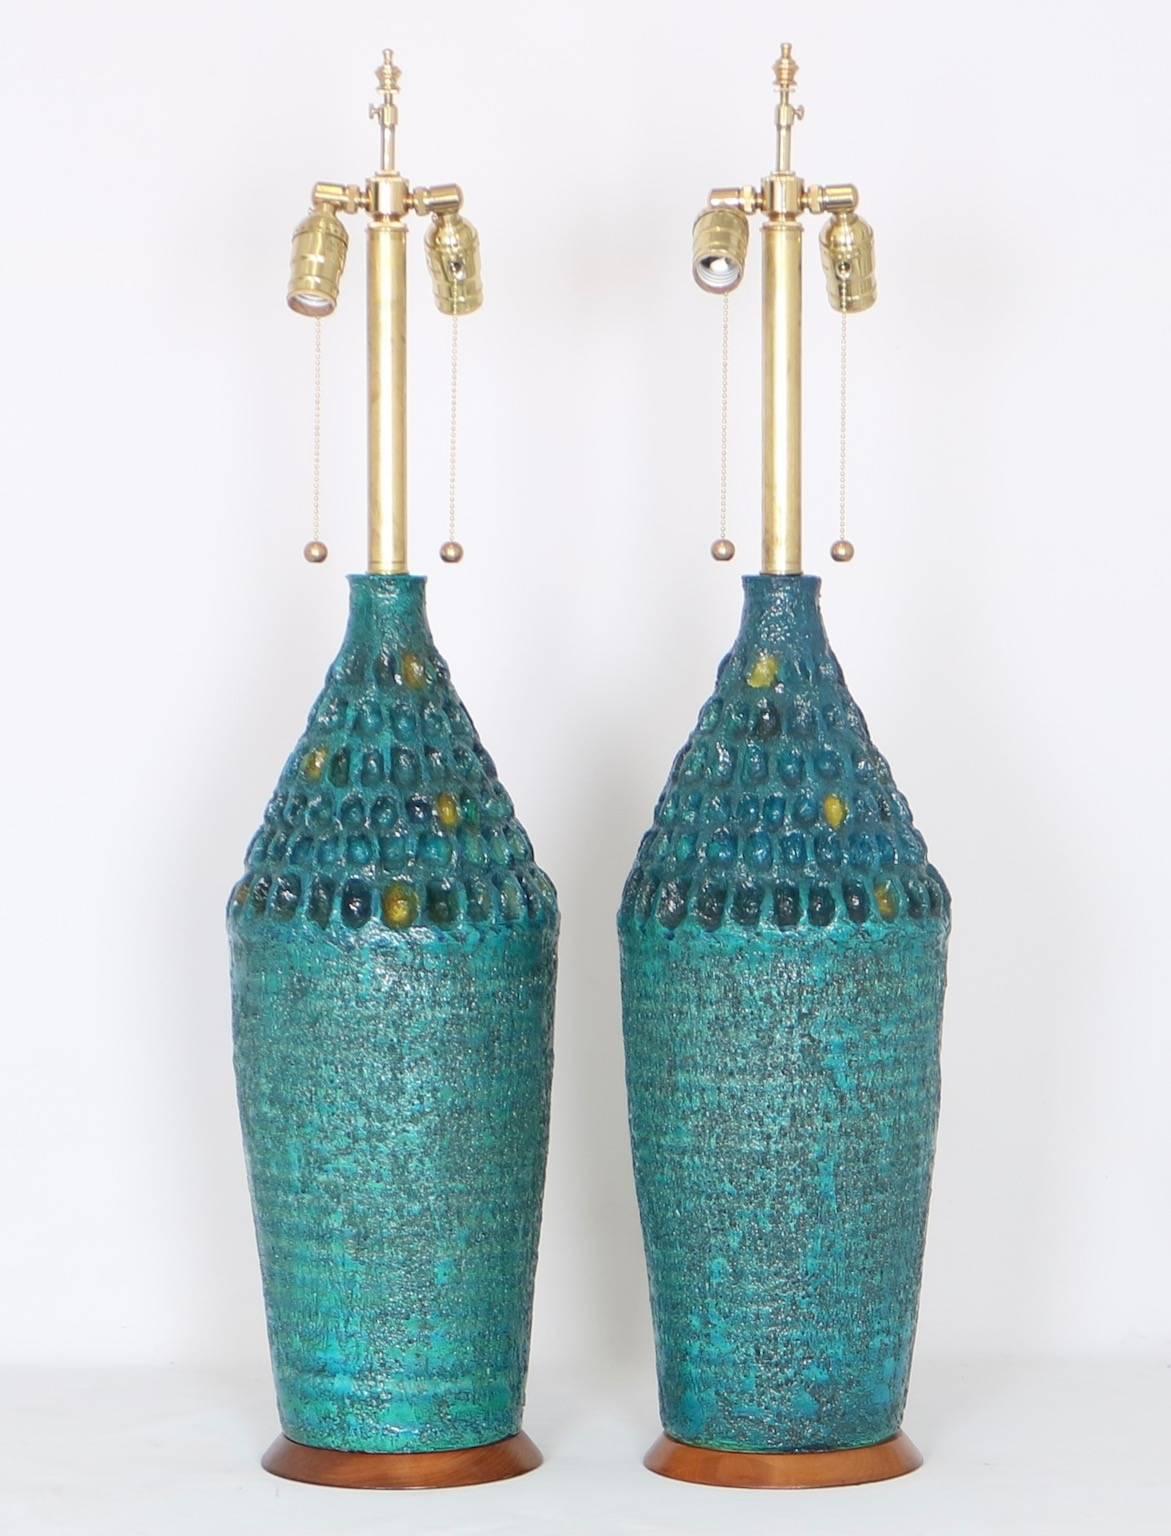 Brutalist style table lamps produced by Quartite Creative Corp. These lamps are dated 1965 and feature textured ceramic turquoise bodies glazed in variants of blues, greens and yellows. The noted height is to the finial each lamp is fully restored